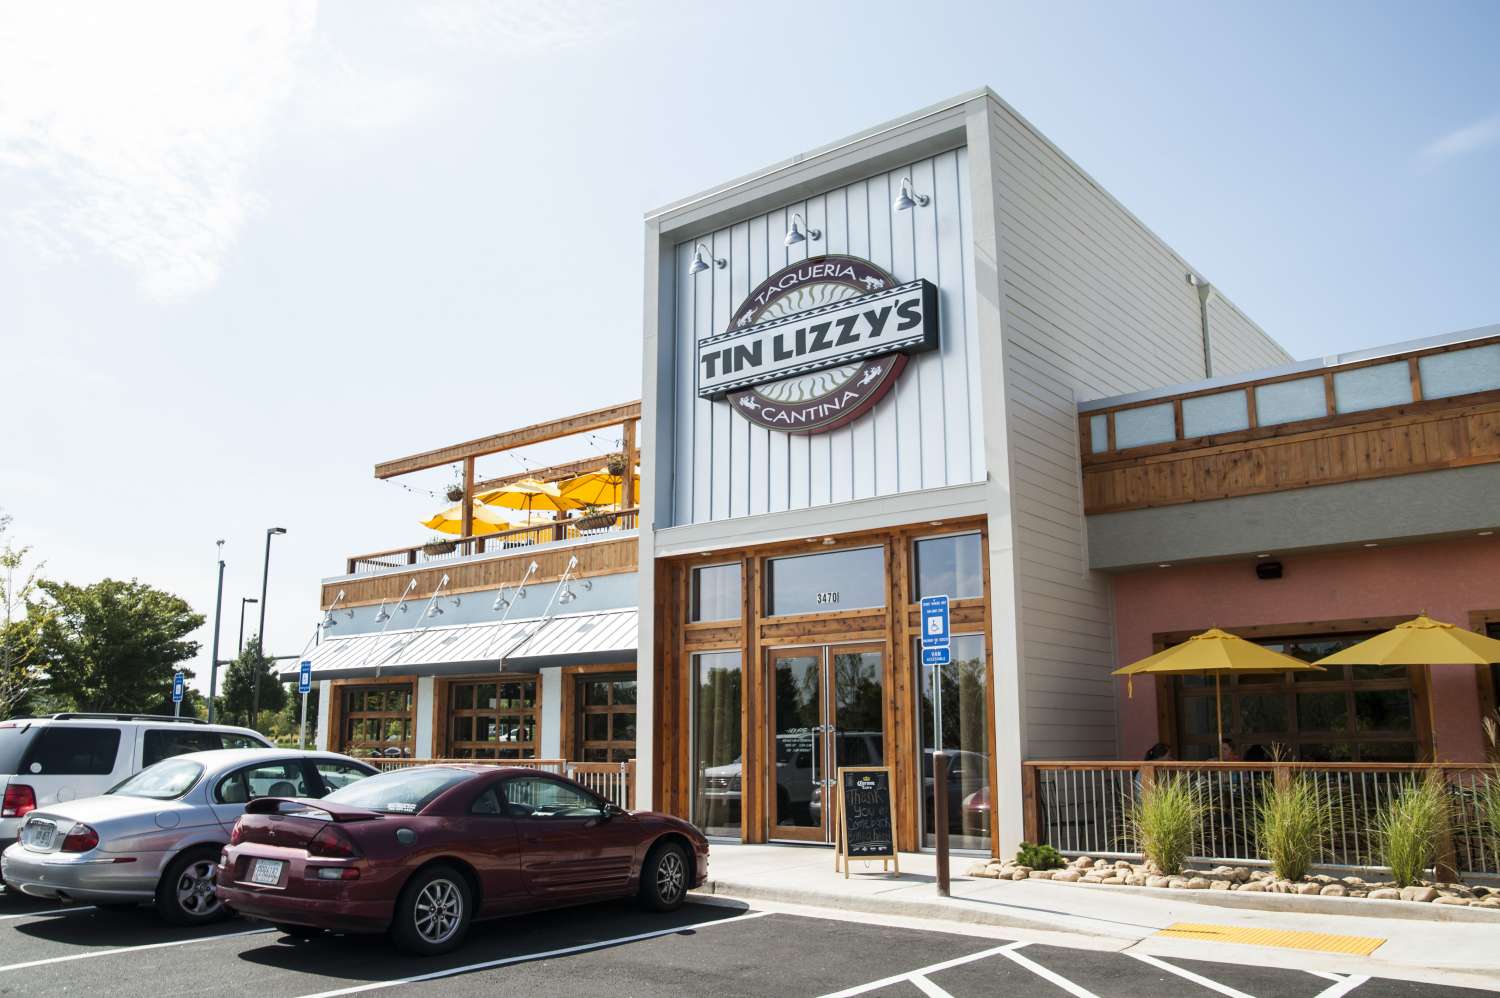 Calling all owls: Tin Lizzy’s is now open in Kennesaw!